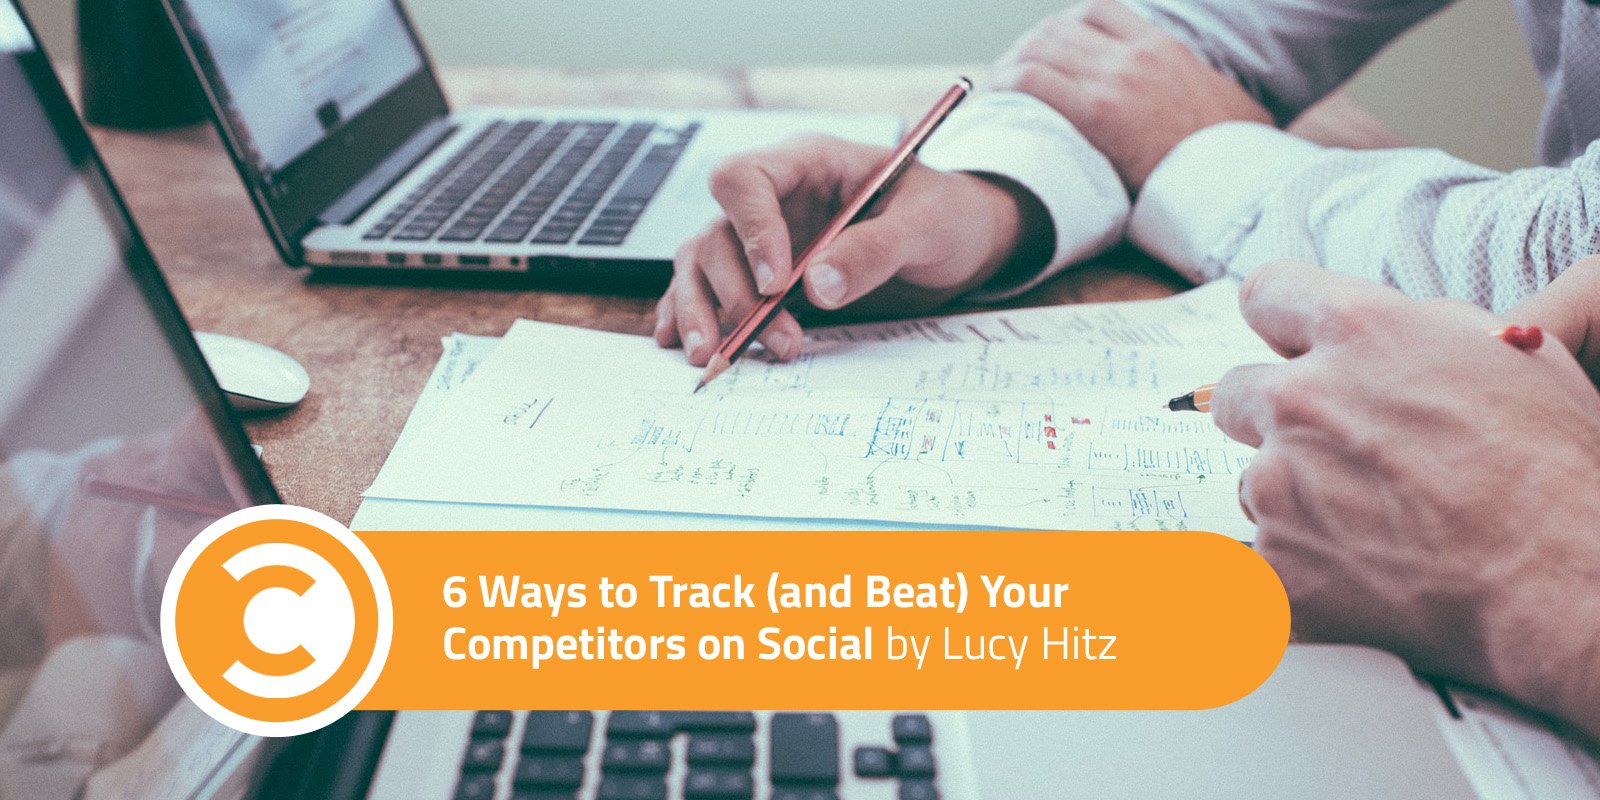 6 Ways to Track (and Beat) Your Competitors on Social